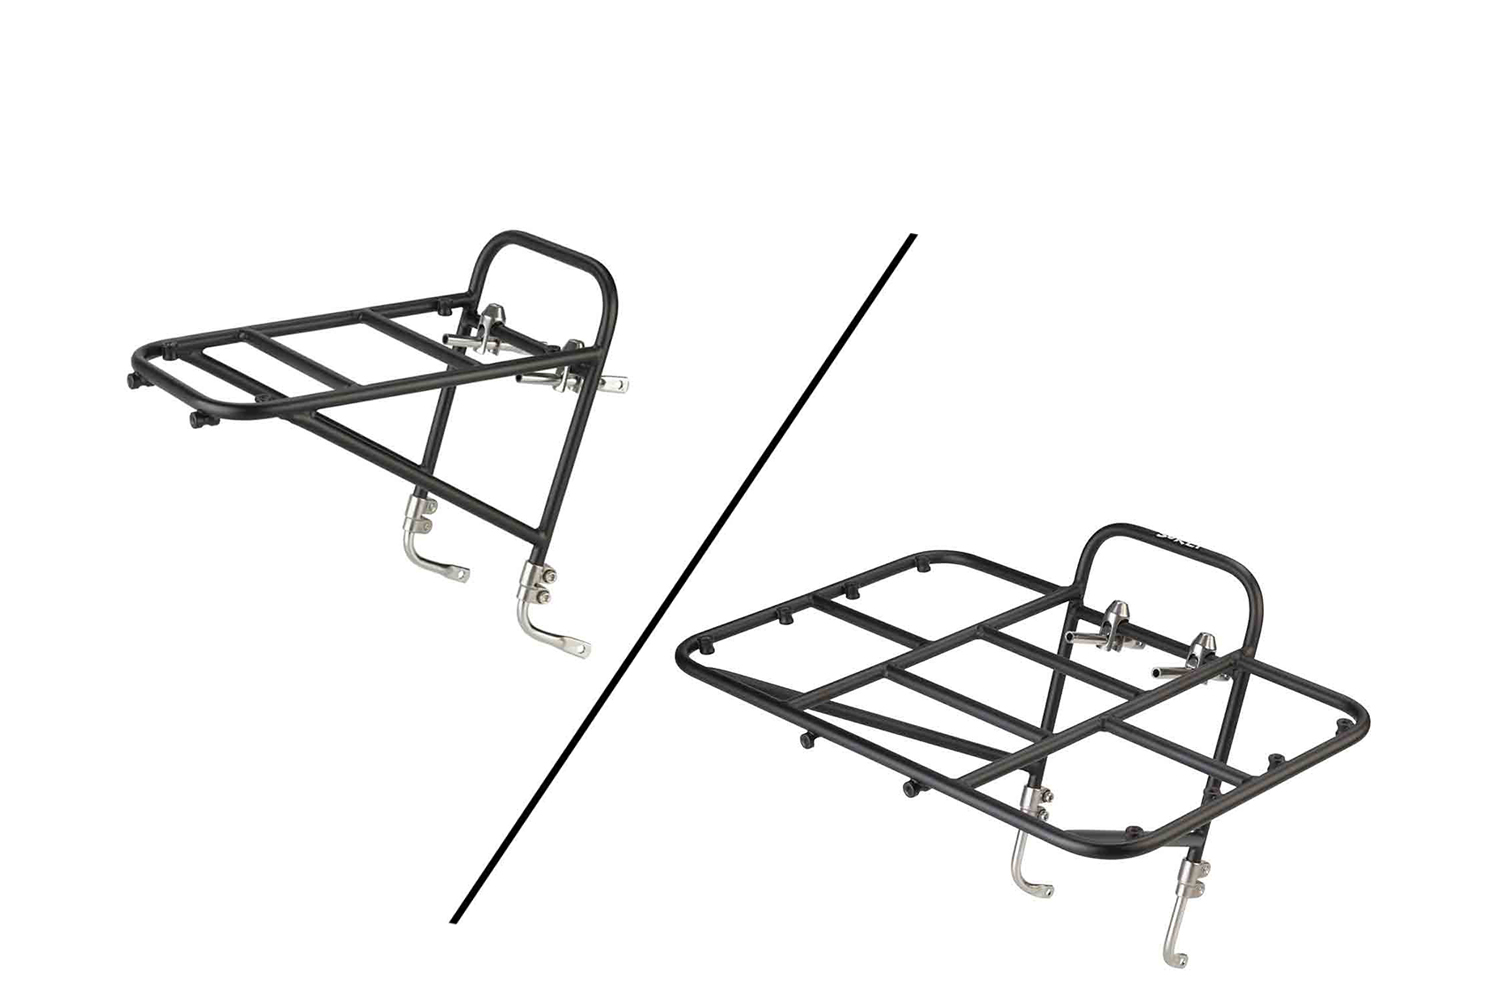 Surly 8 Pack Rack and 24 Pack Rack Safety Recall Hardware Request